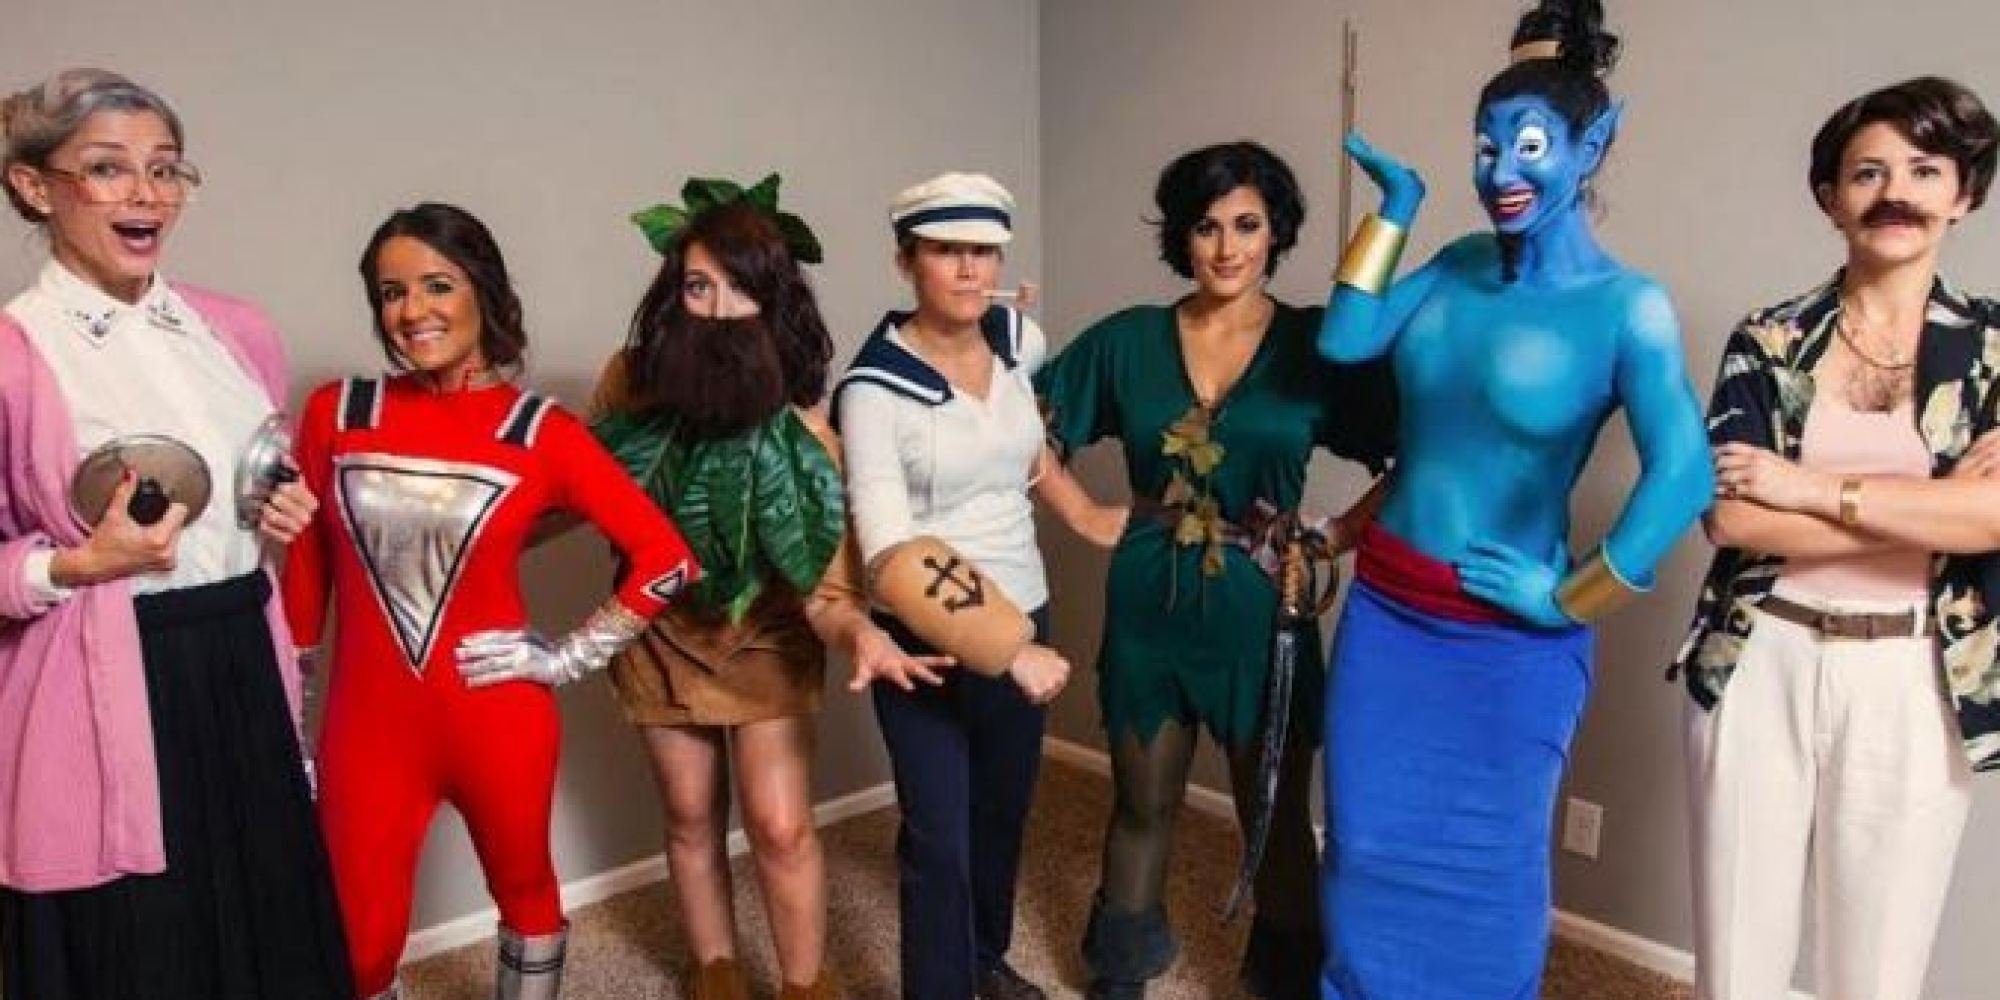 10 Awesome Funny Group Halloween Costumes Ideas 2022